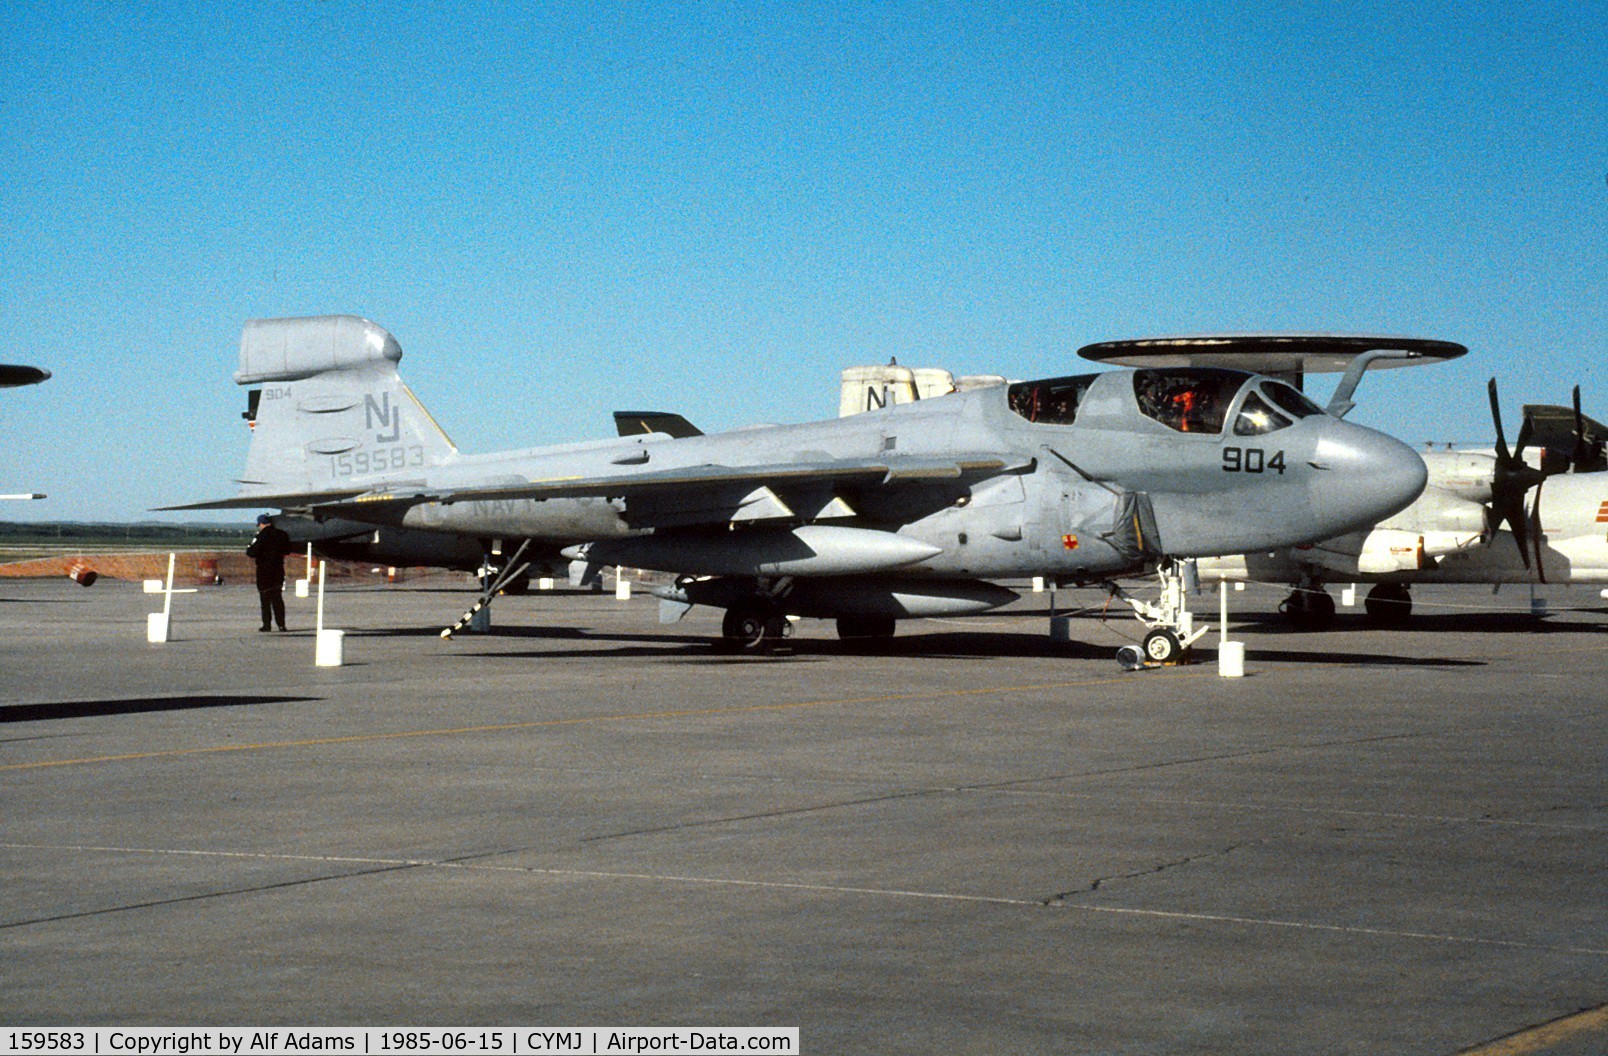 159583, Grumman EA-6B Prowler C/N P-49, Photo shows EA-6B Prowler 159583 on display at the annual airshow at Canadian Forces Base Moose Jaw, Saskatchewan, Canada in 1985.